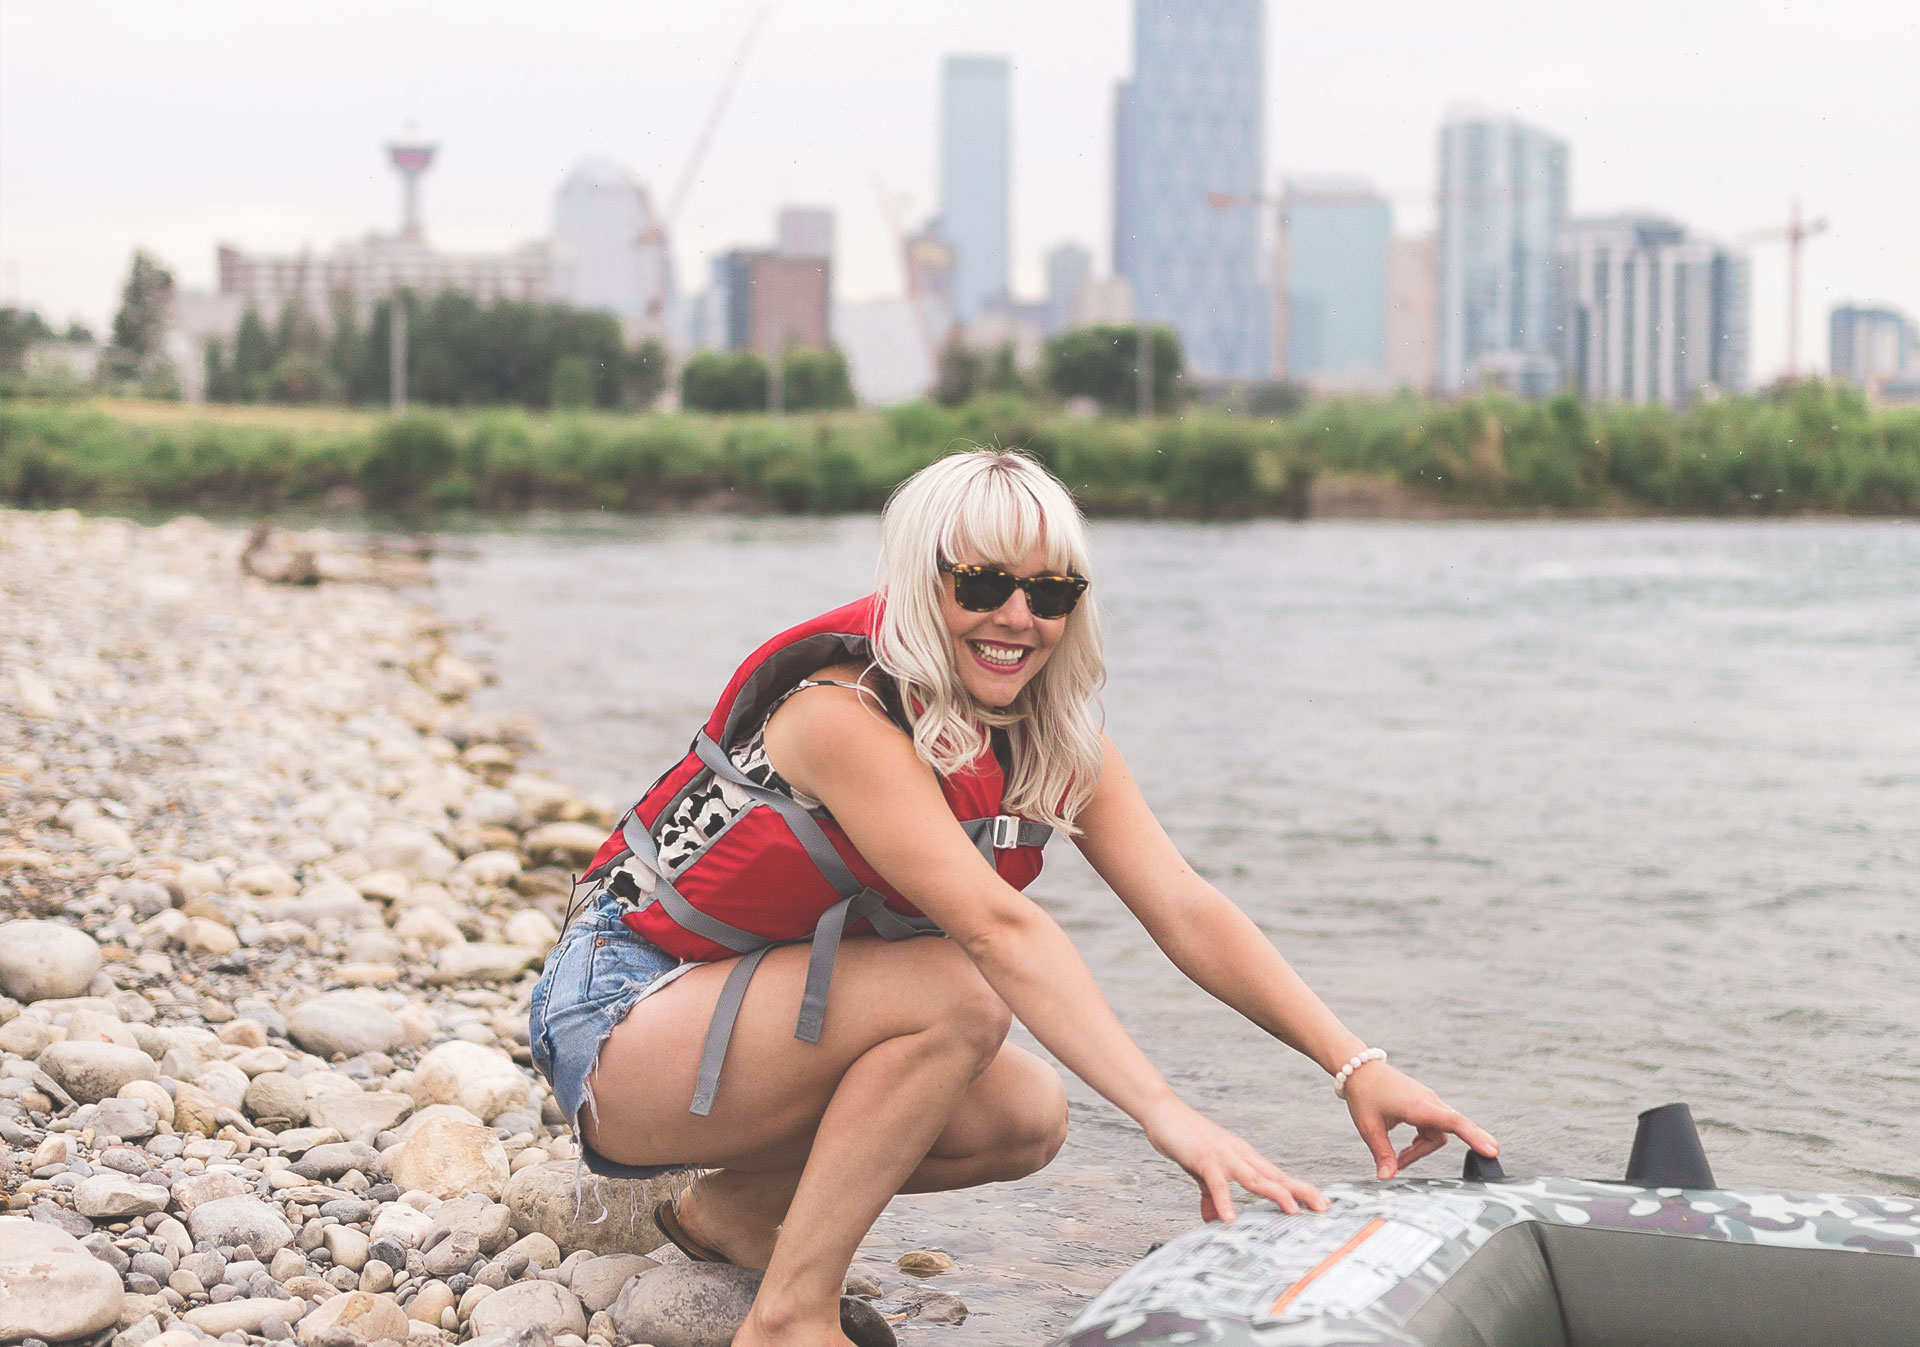 You have to float the river when you visit Calgary! (photo: @Davey_Gravy)